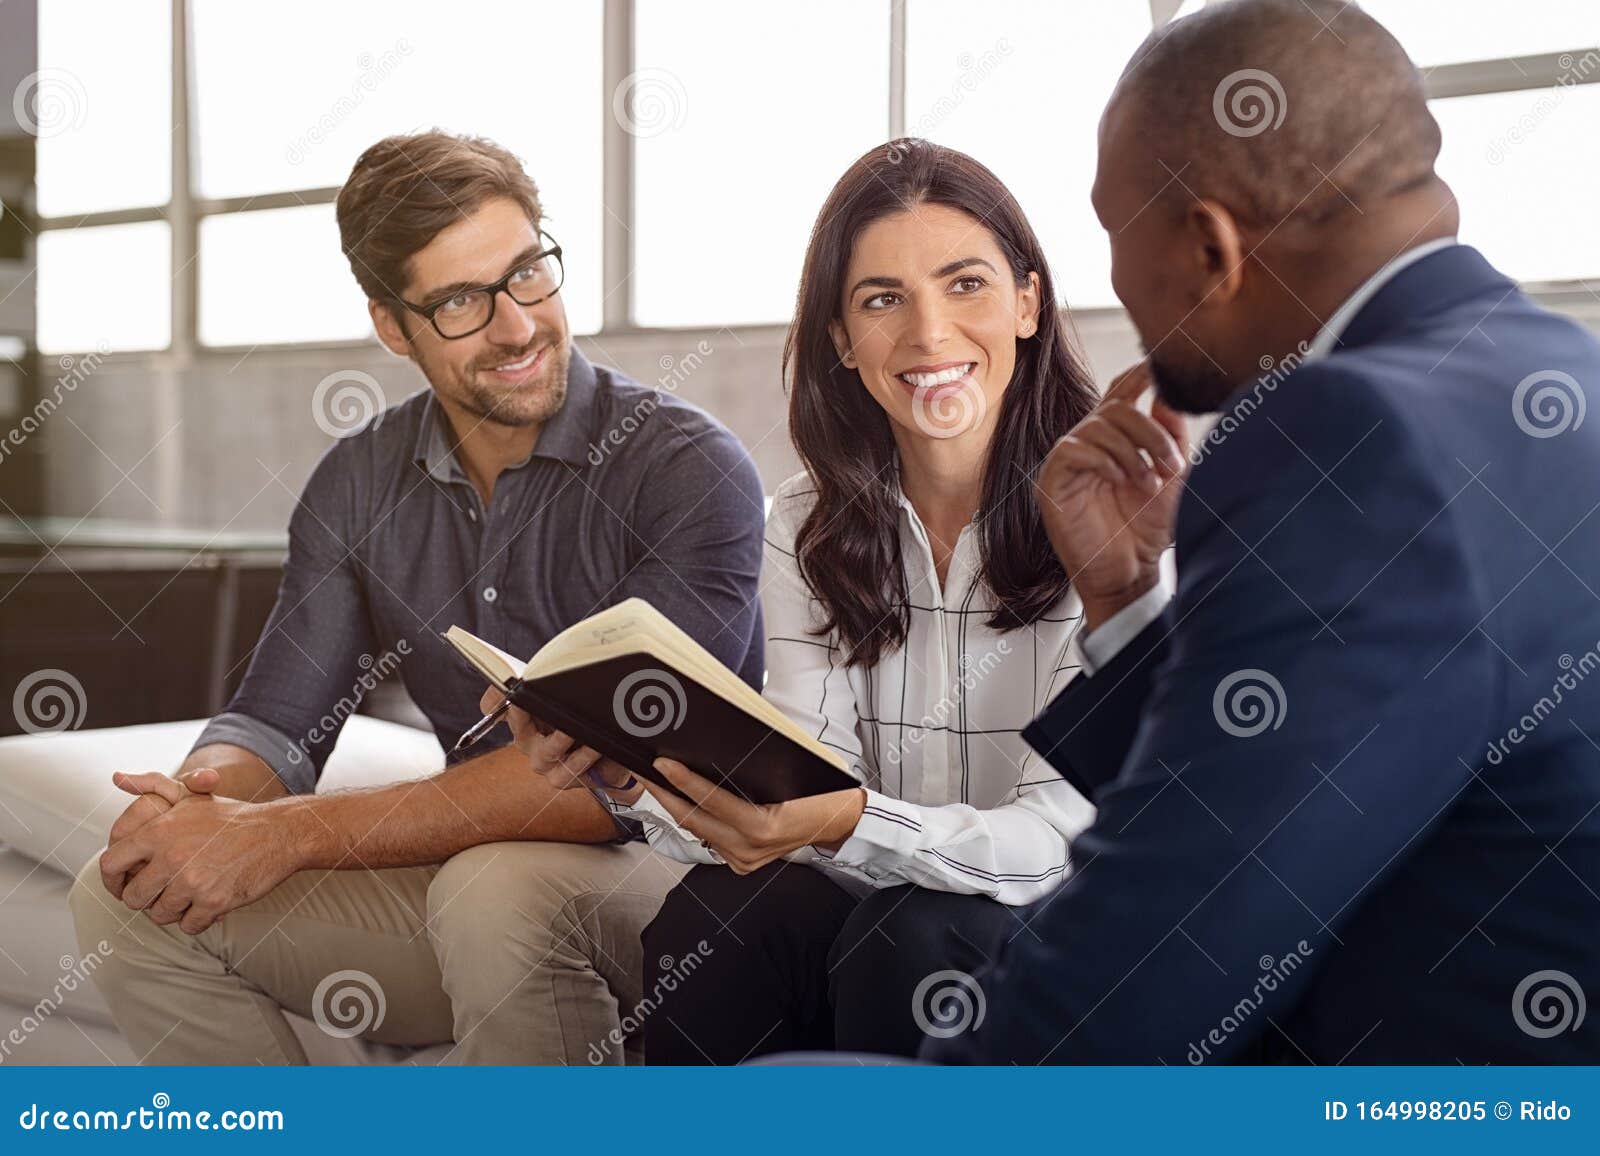 business people in conversation during meeting